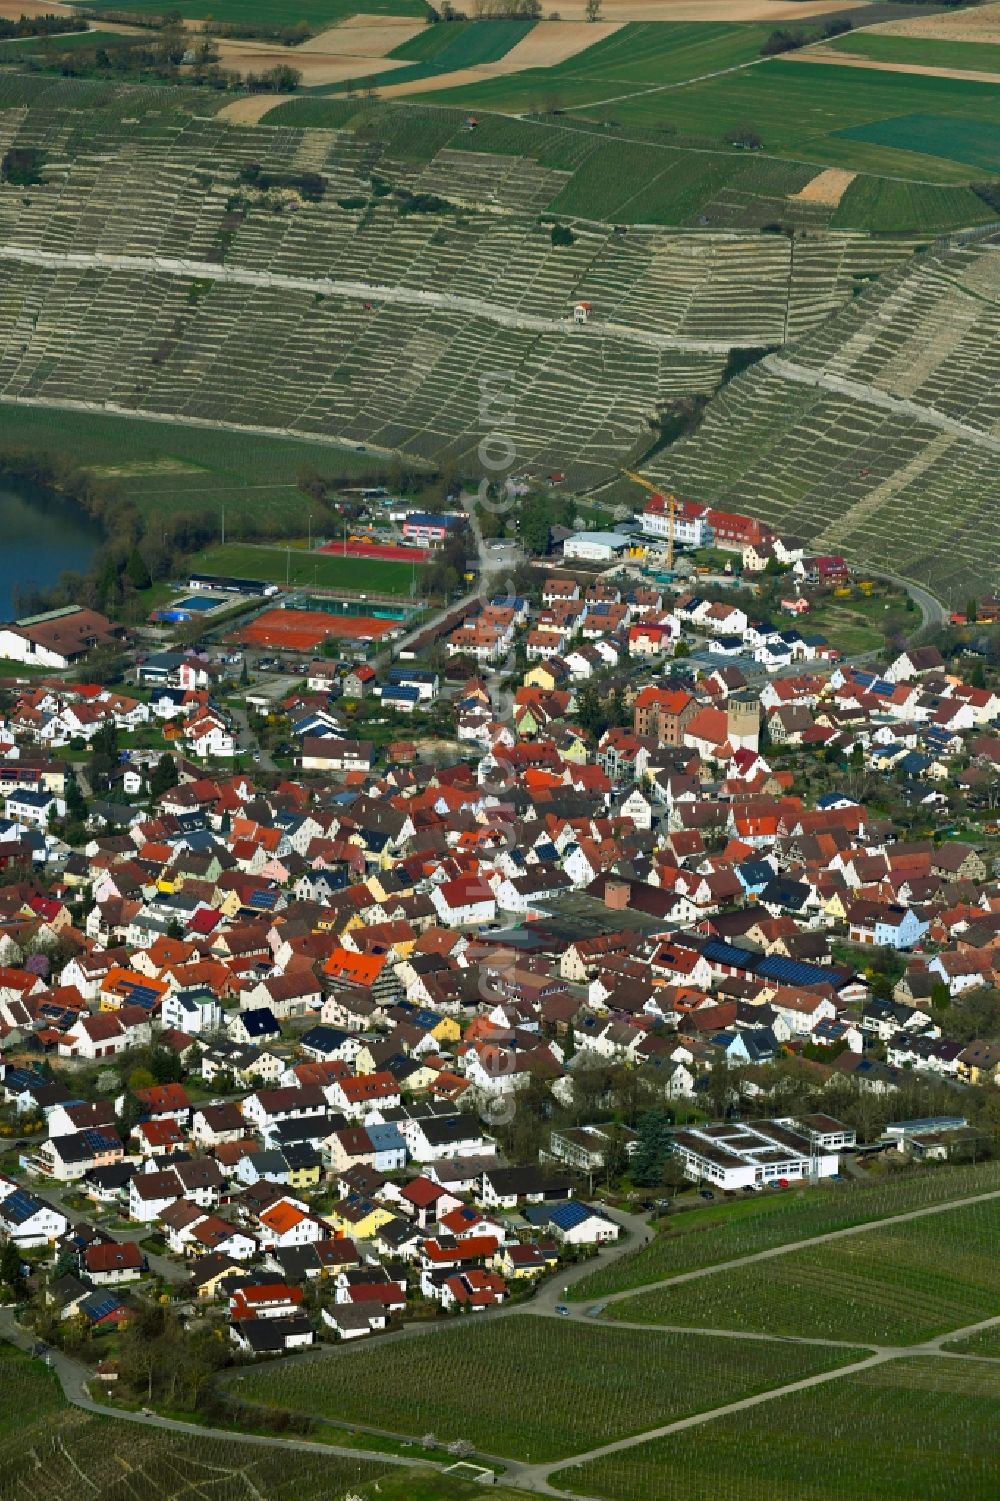 Aerial photograph Mundelsheim - View of the town of Mundelsheim on a river loop of the Neckar between vineyards and fruit growing slopes in the state Baden-Wurttemberg, Germany